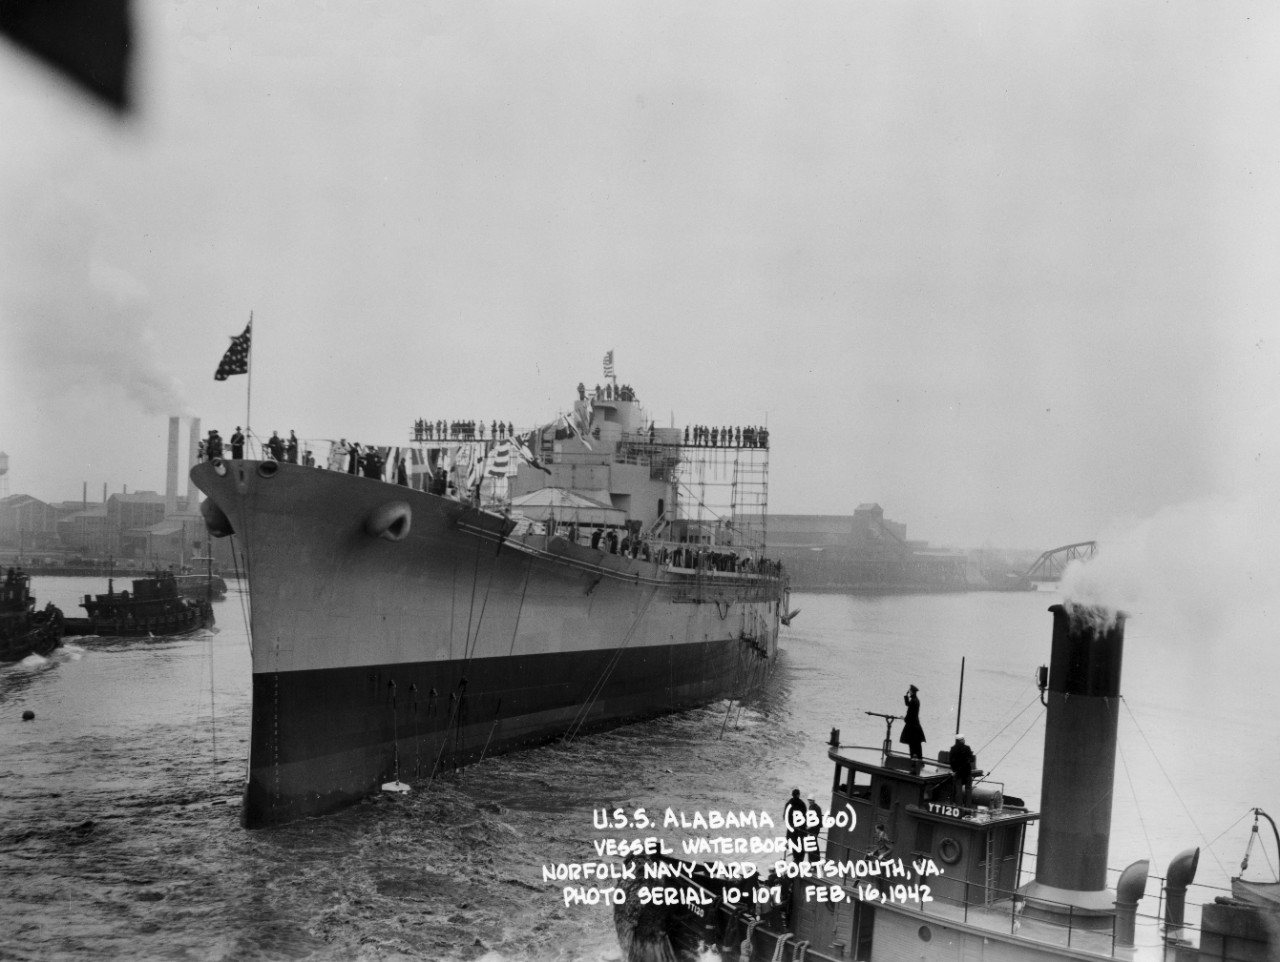 Collection of 24 photographs circa 1942 originally collected by LCDR Carlyle M. Terry, a Public Information Officer at Norfolk Navy Yard, regarding USS Alabama (BB-60) construction and launching activities. Specific imagery consists of launching of the Alabama at Norfolk on February 16, 1942; christening by Mrs. Lister Hill and sponsor’s party – including Secretary of the Navy Frank Knox; the ship sliding down the ways after christening; dinner and concert events; and various images of ship’s launching arrangements and gear (fore poppet, after poppet, chain drags, cable attachments, starting jacks, etc.). 